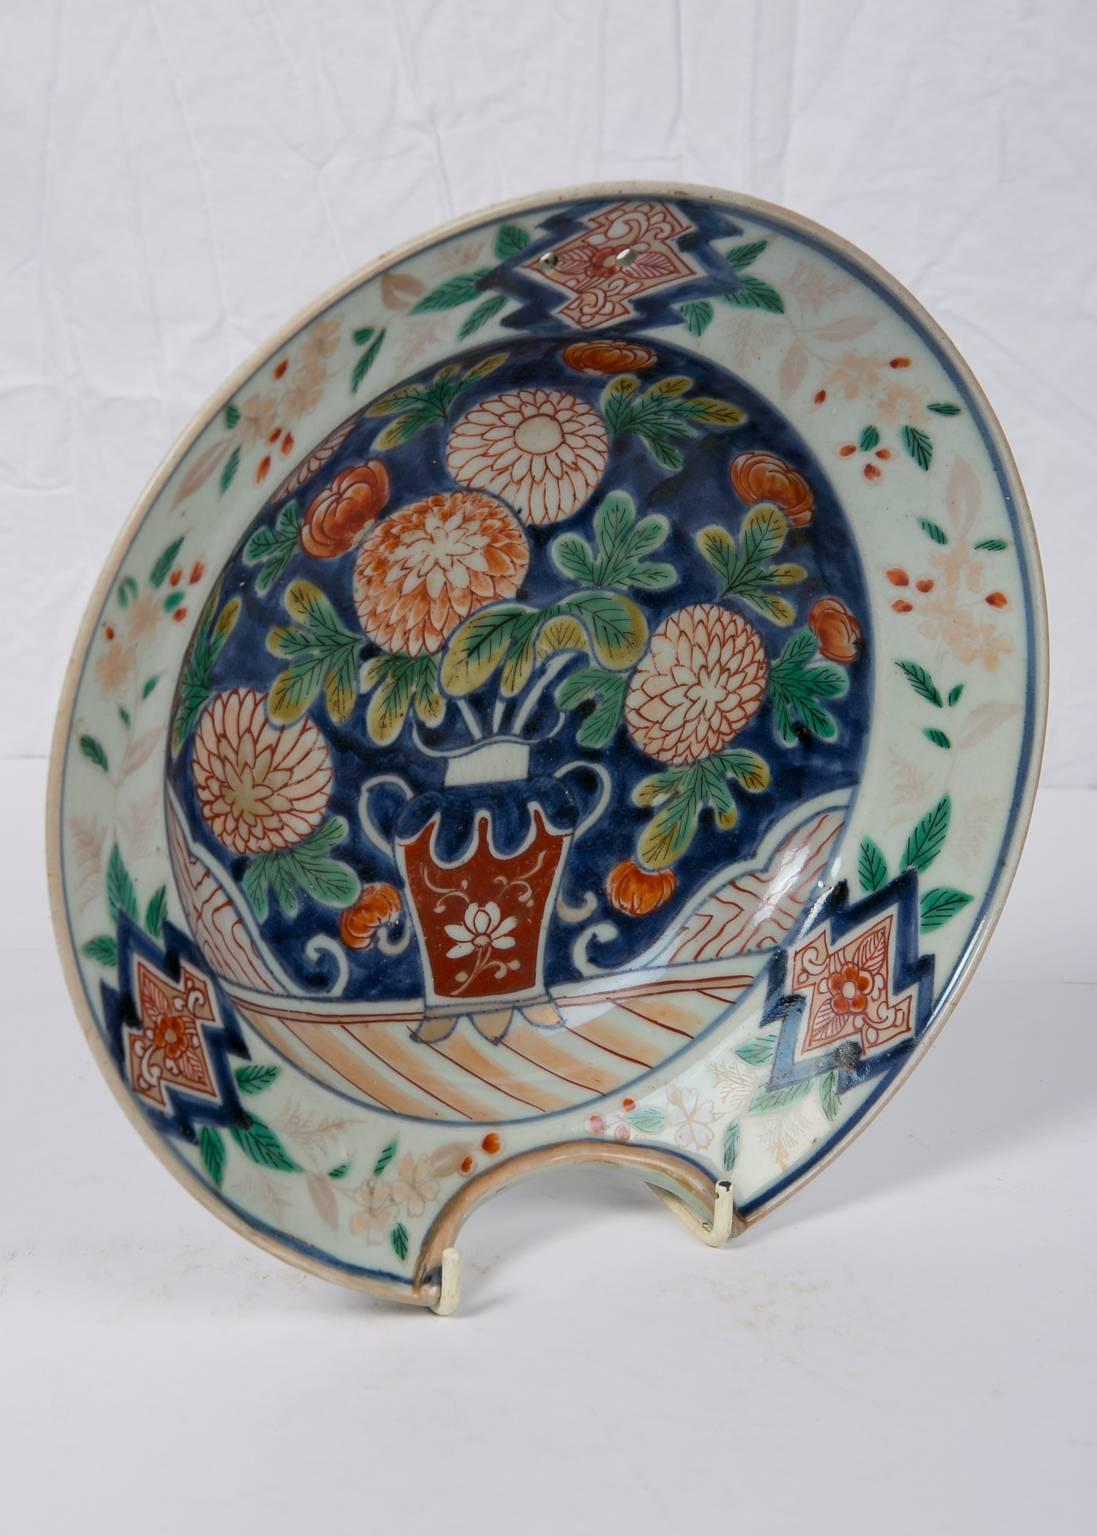 Qing Chinese Porcelain Bowl Made during the Daoguang Period circa 1820